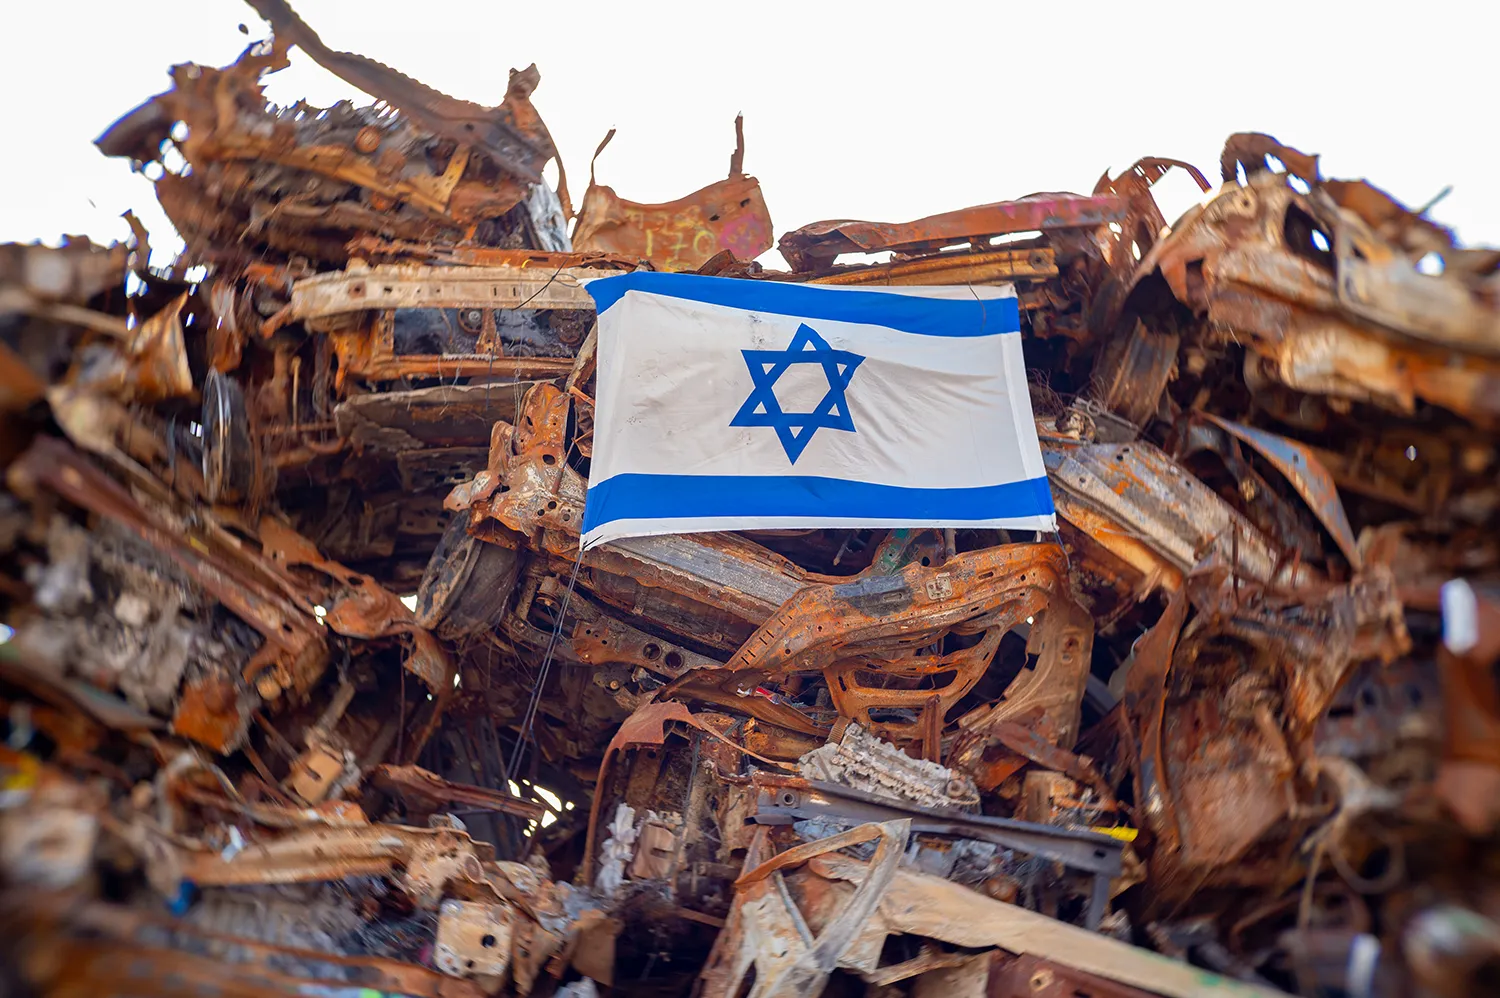 An Israeli flag sits amont a twisted pile of metal, the remains of damaged cars after the Hamas attacks on Israel.